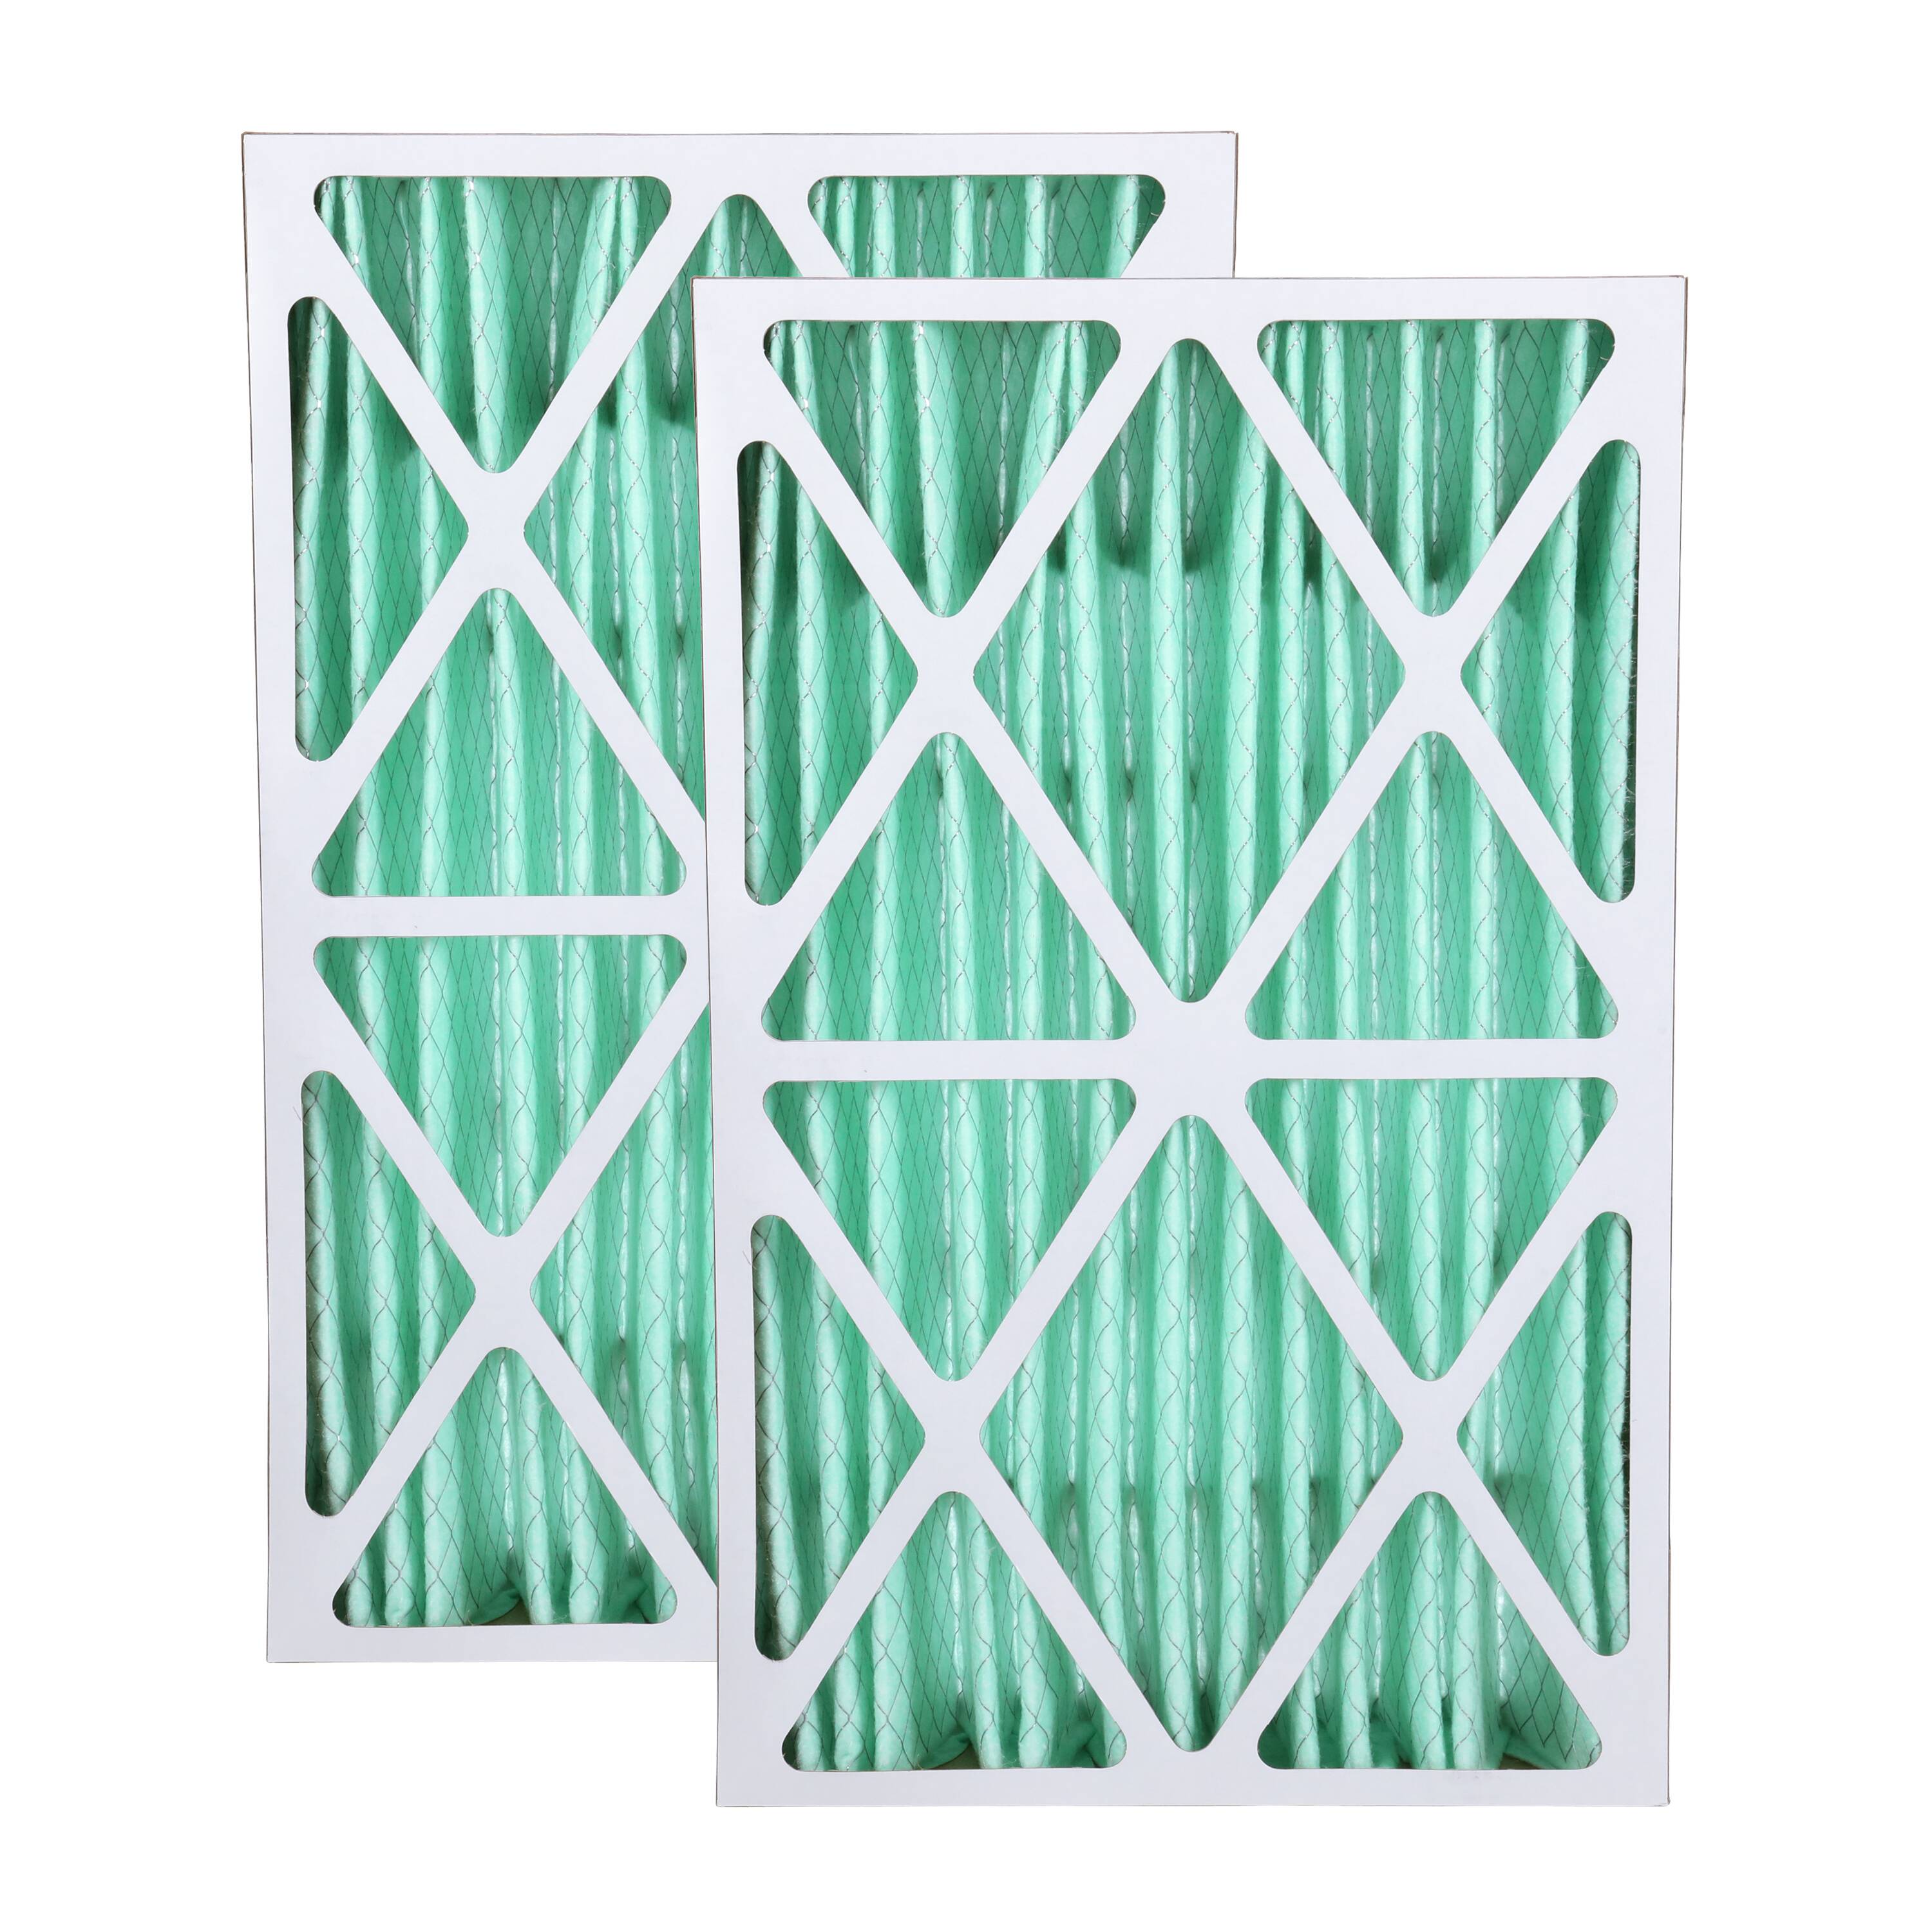 Airbay MERV 13 Filter Material for Air Filters (16ft), Air Particles, Clean Living Basic Dust Small As 0.3 microns, Efficiency Breat